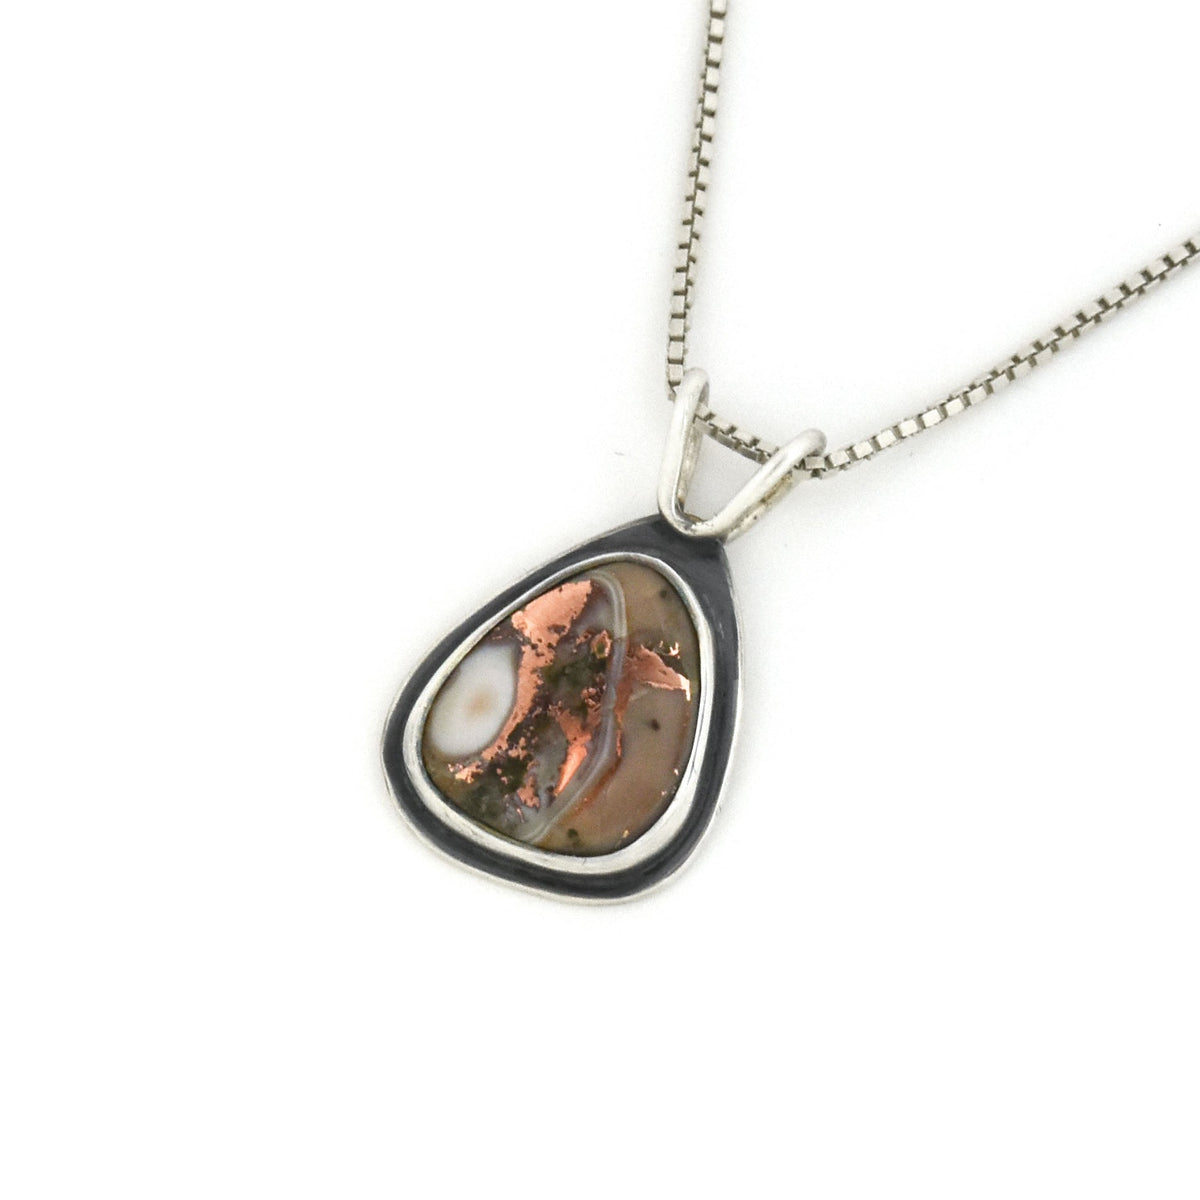 Lake Superior Copper Agate Drop Pendant No. 4 - Silver Pendant   5742 - handmade by Beth Millner Jewelry